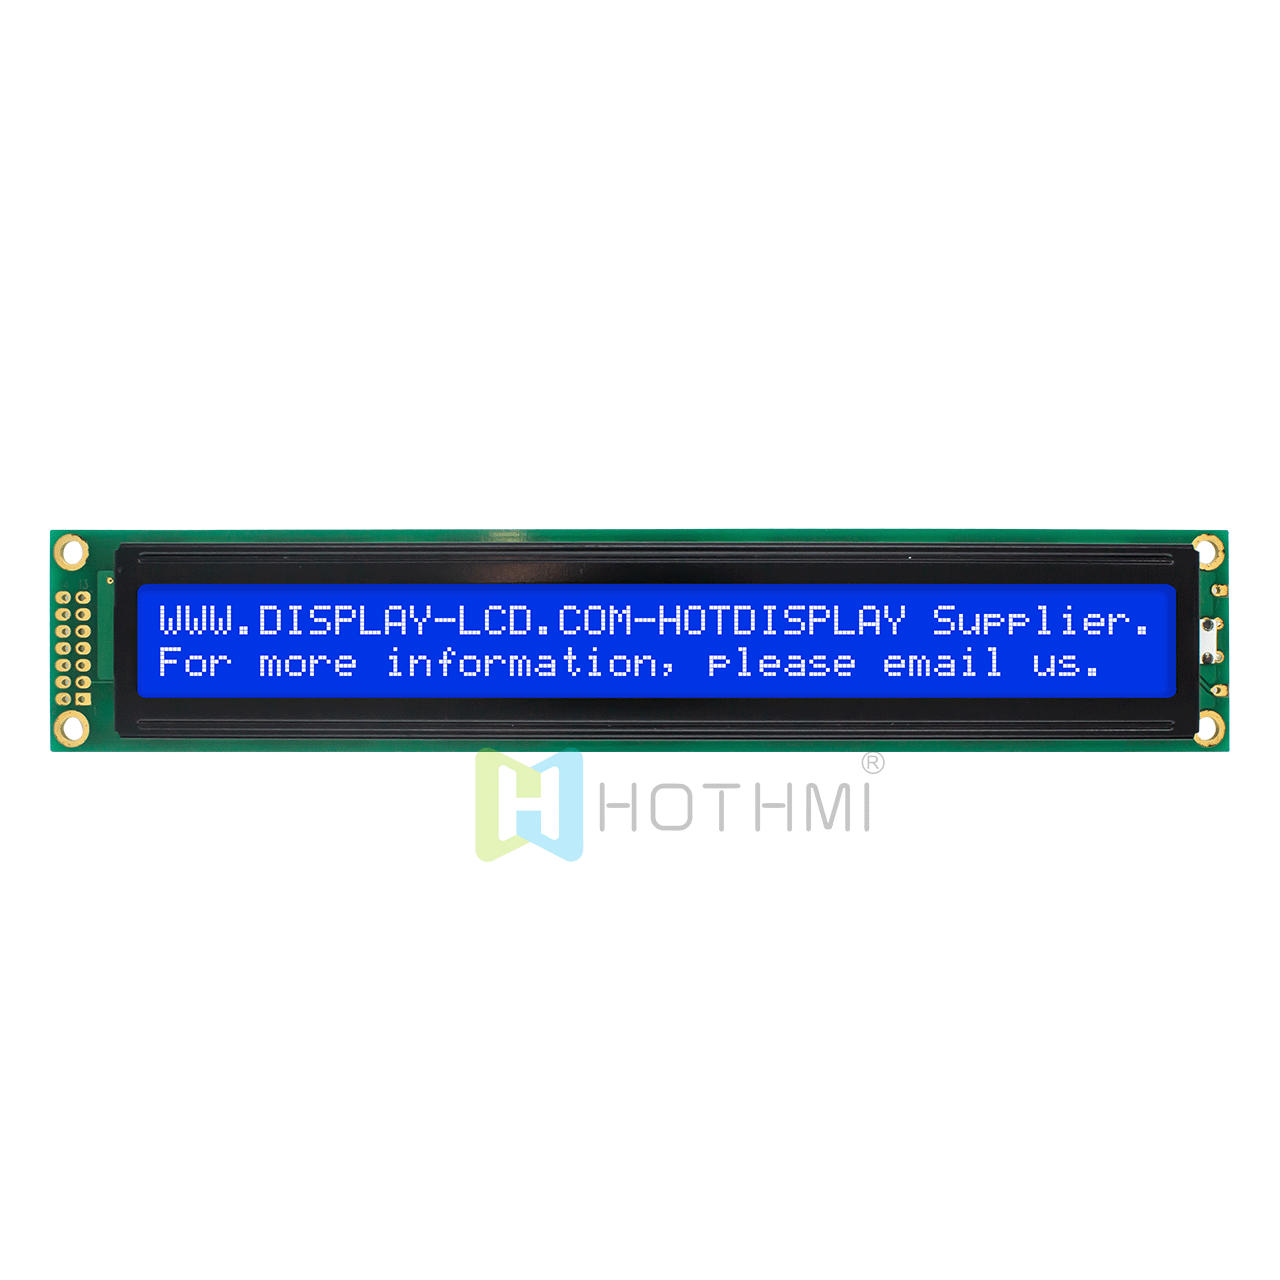 3.3V/5.0v | 2X40 character monochrome LCD display module | STN negative display | with white backlight | blue background with white characters | Arduino display